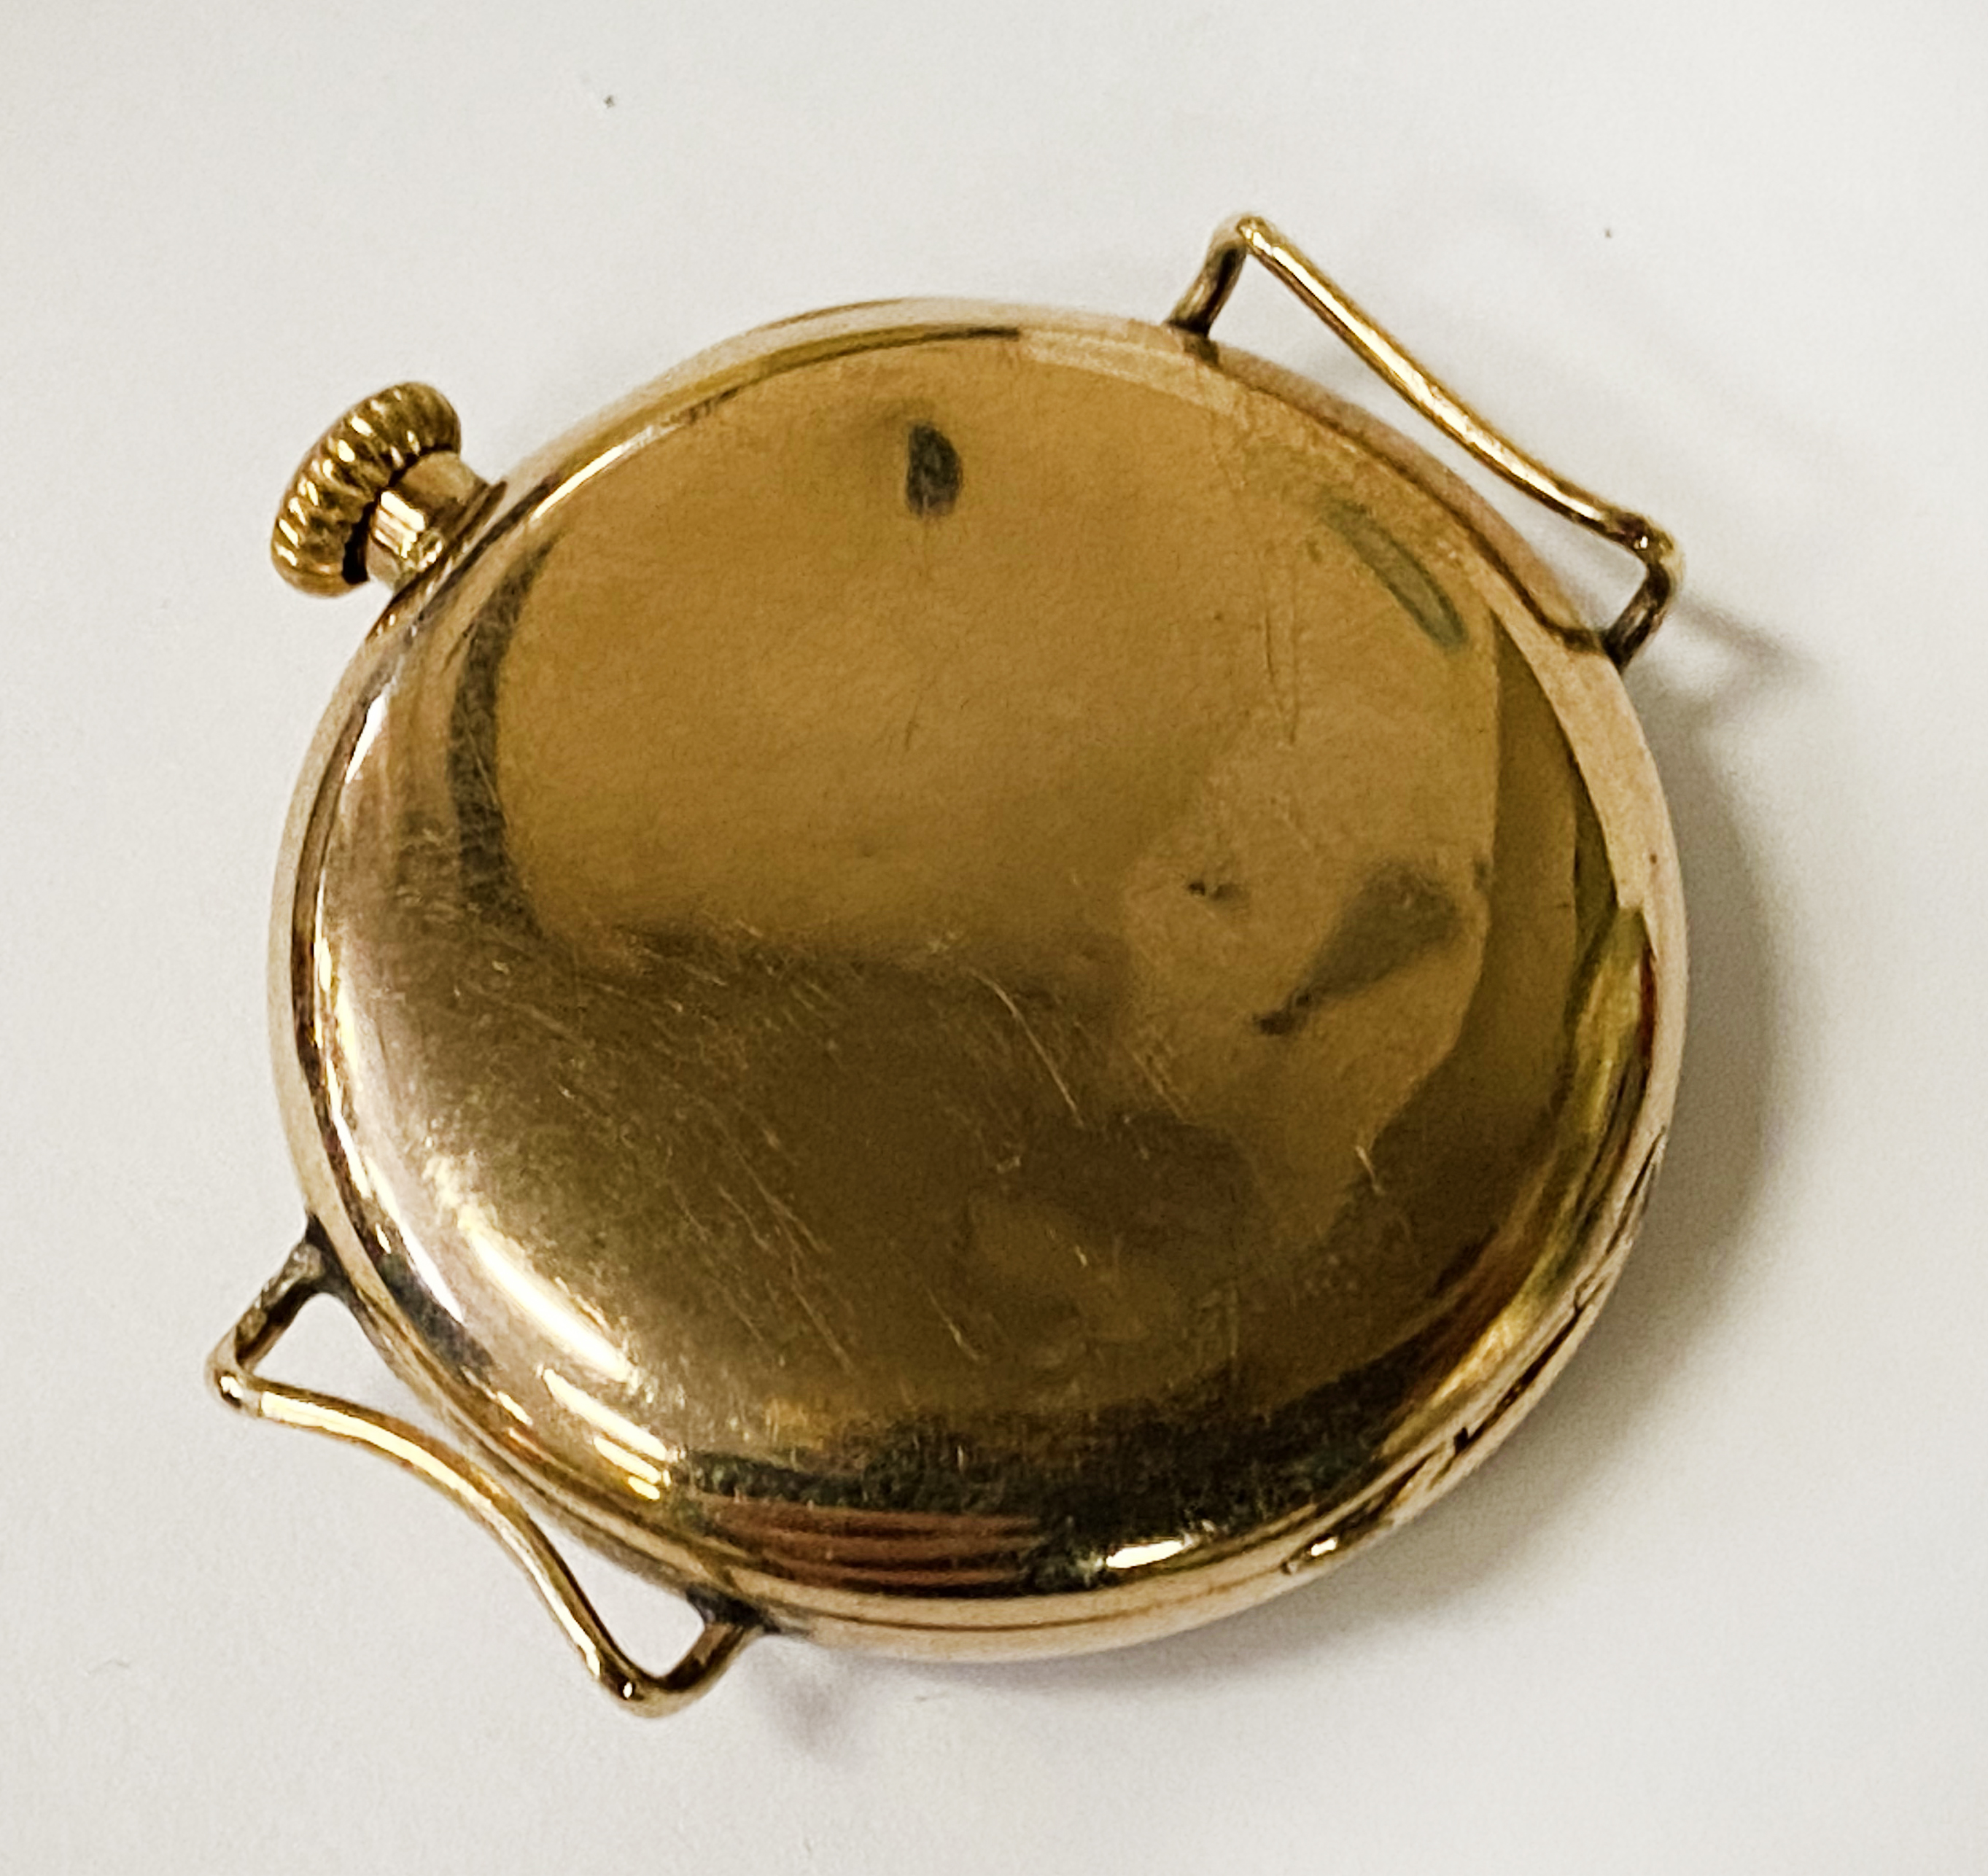 ROLEX 9CT GOLD TRENCH ART DECO WATCH - Image 2 of 2